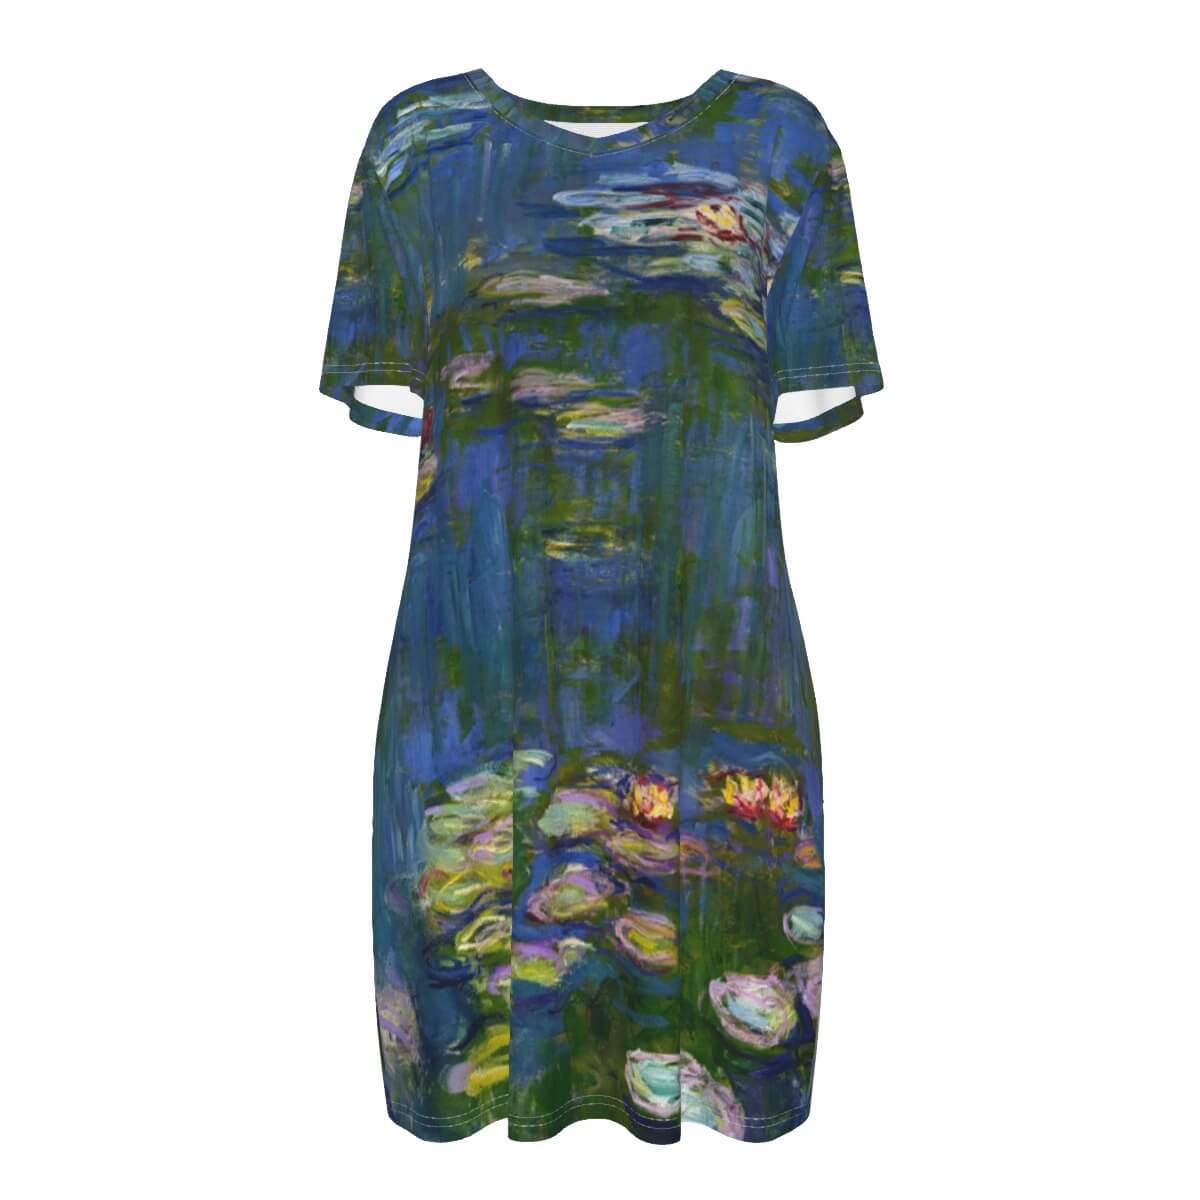 Enchanting Lily Pond Dress in Cotton